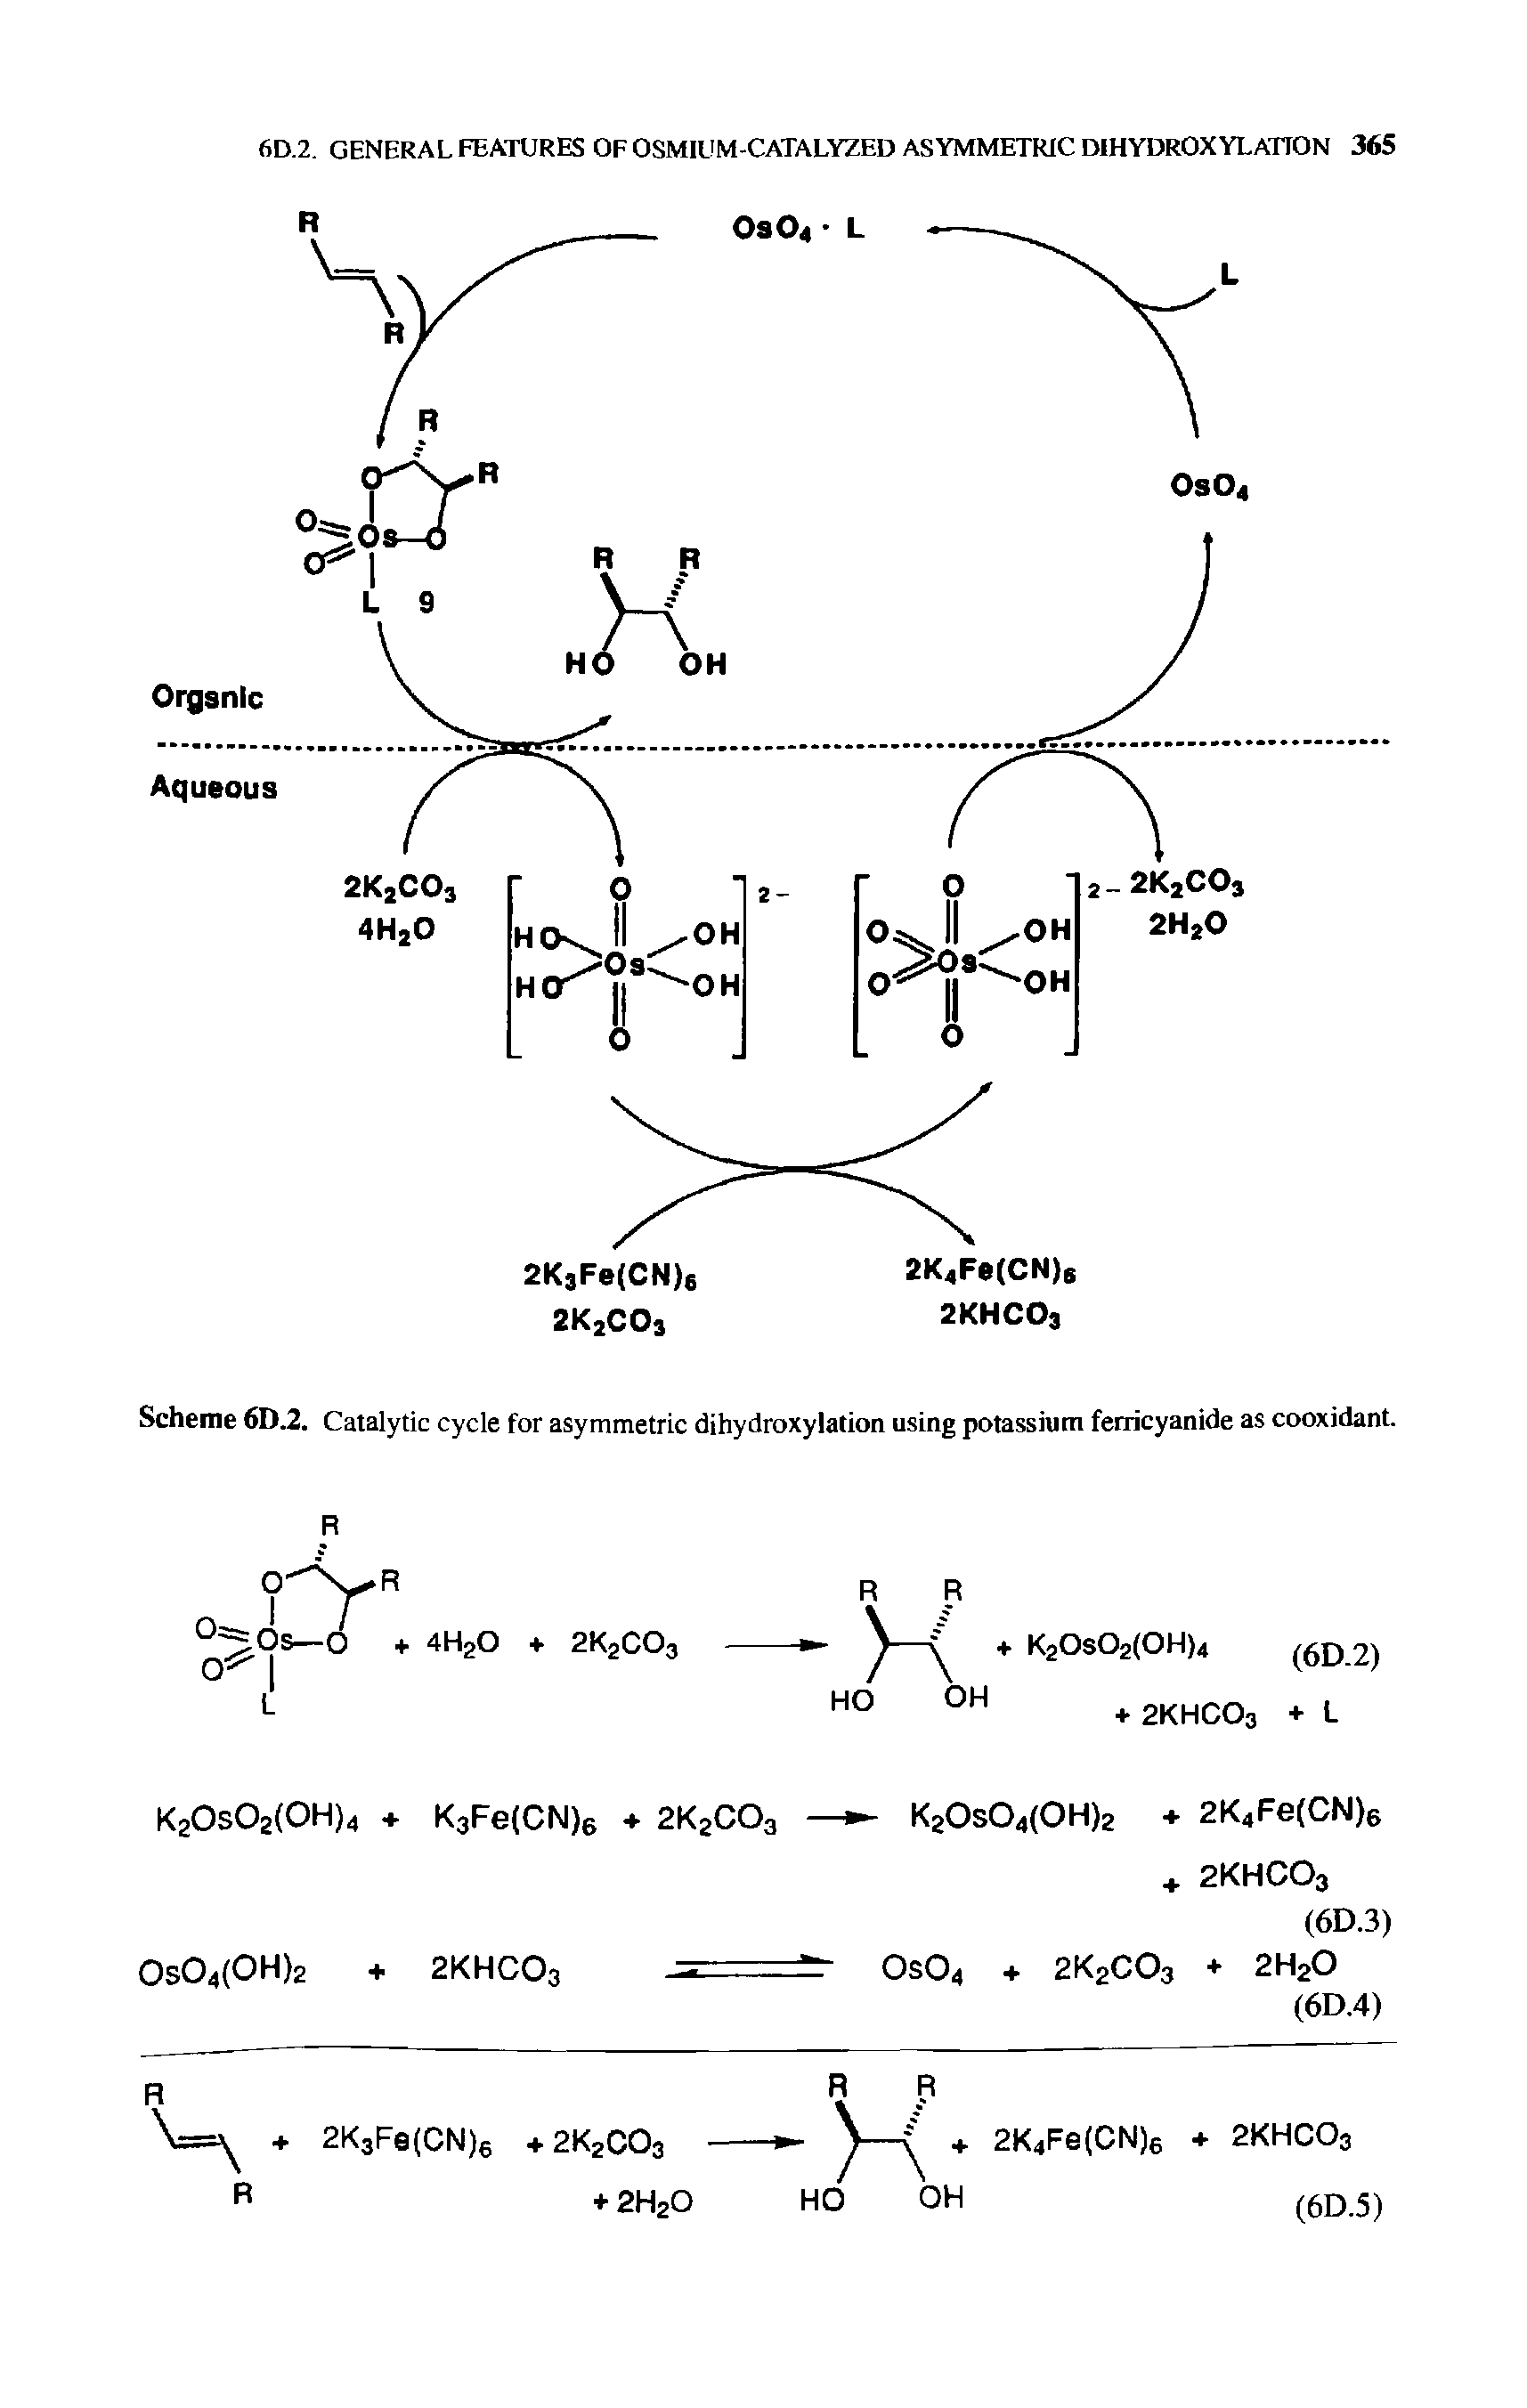 Scheme 6D.2. Catalytic cycle for asymmetric dihydroxylation using potassium ferricyanide as cooxidant.